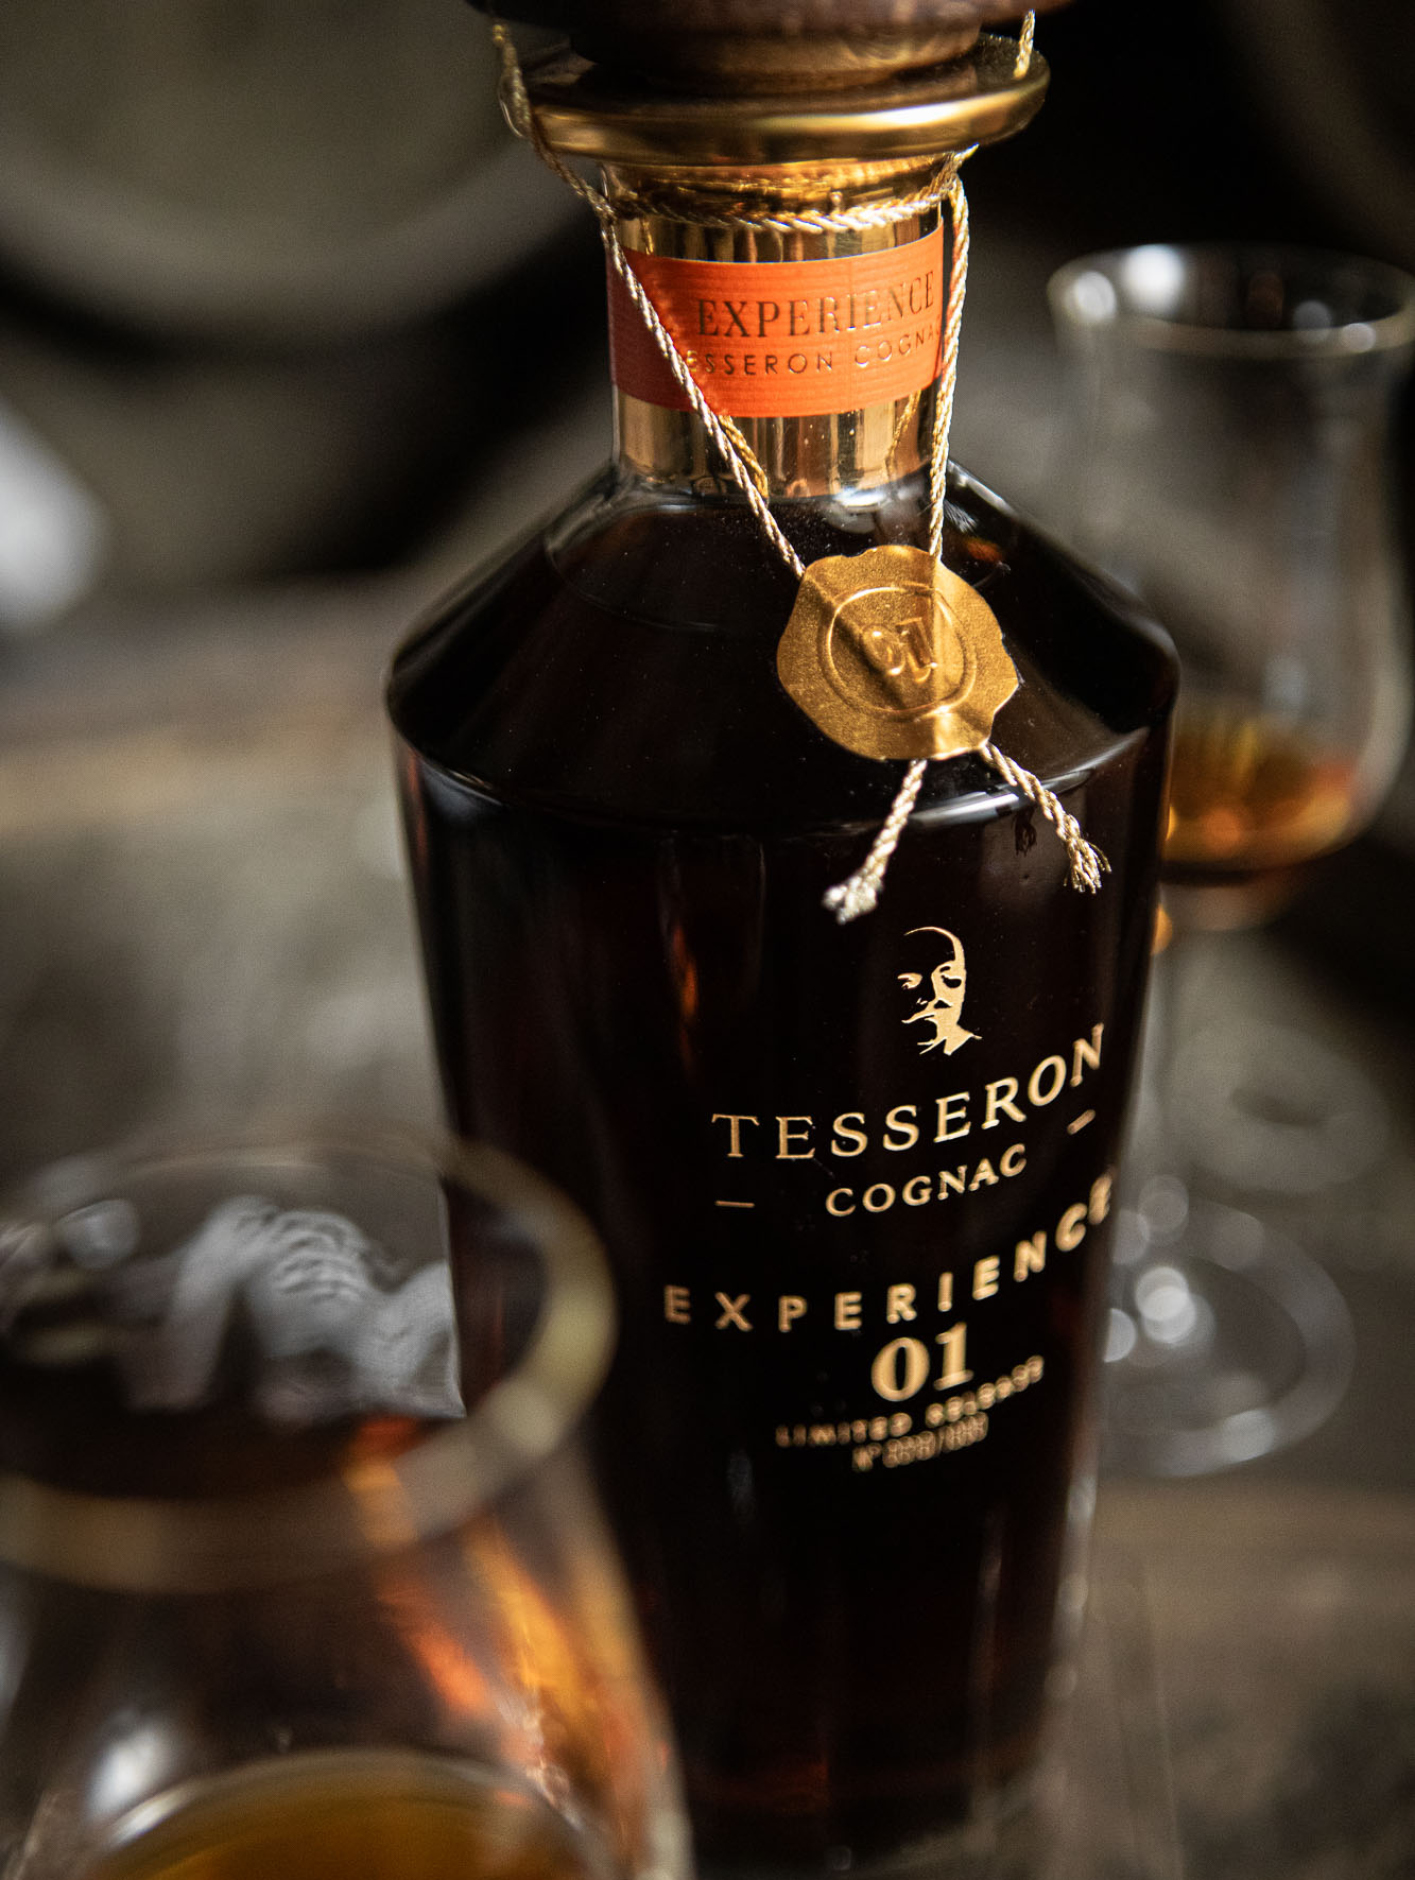 A bottle of the limited-edition cognac Tesseron Experience 01